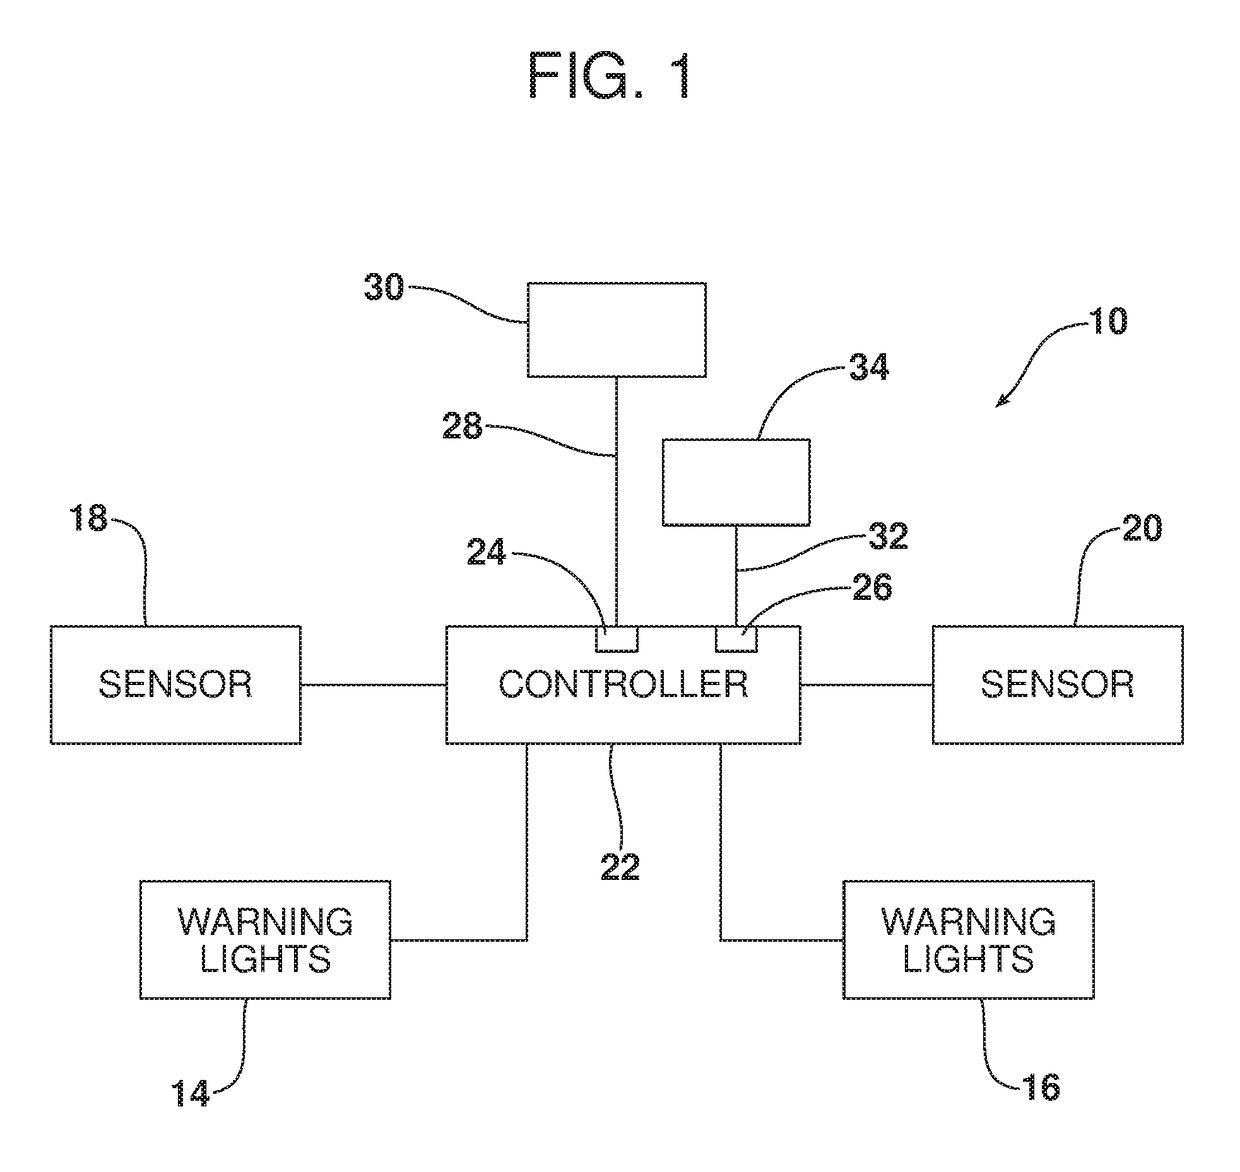 Collision protection system for a parked motor vehicle